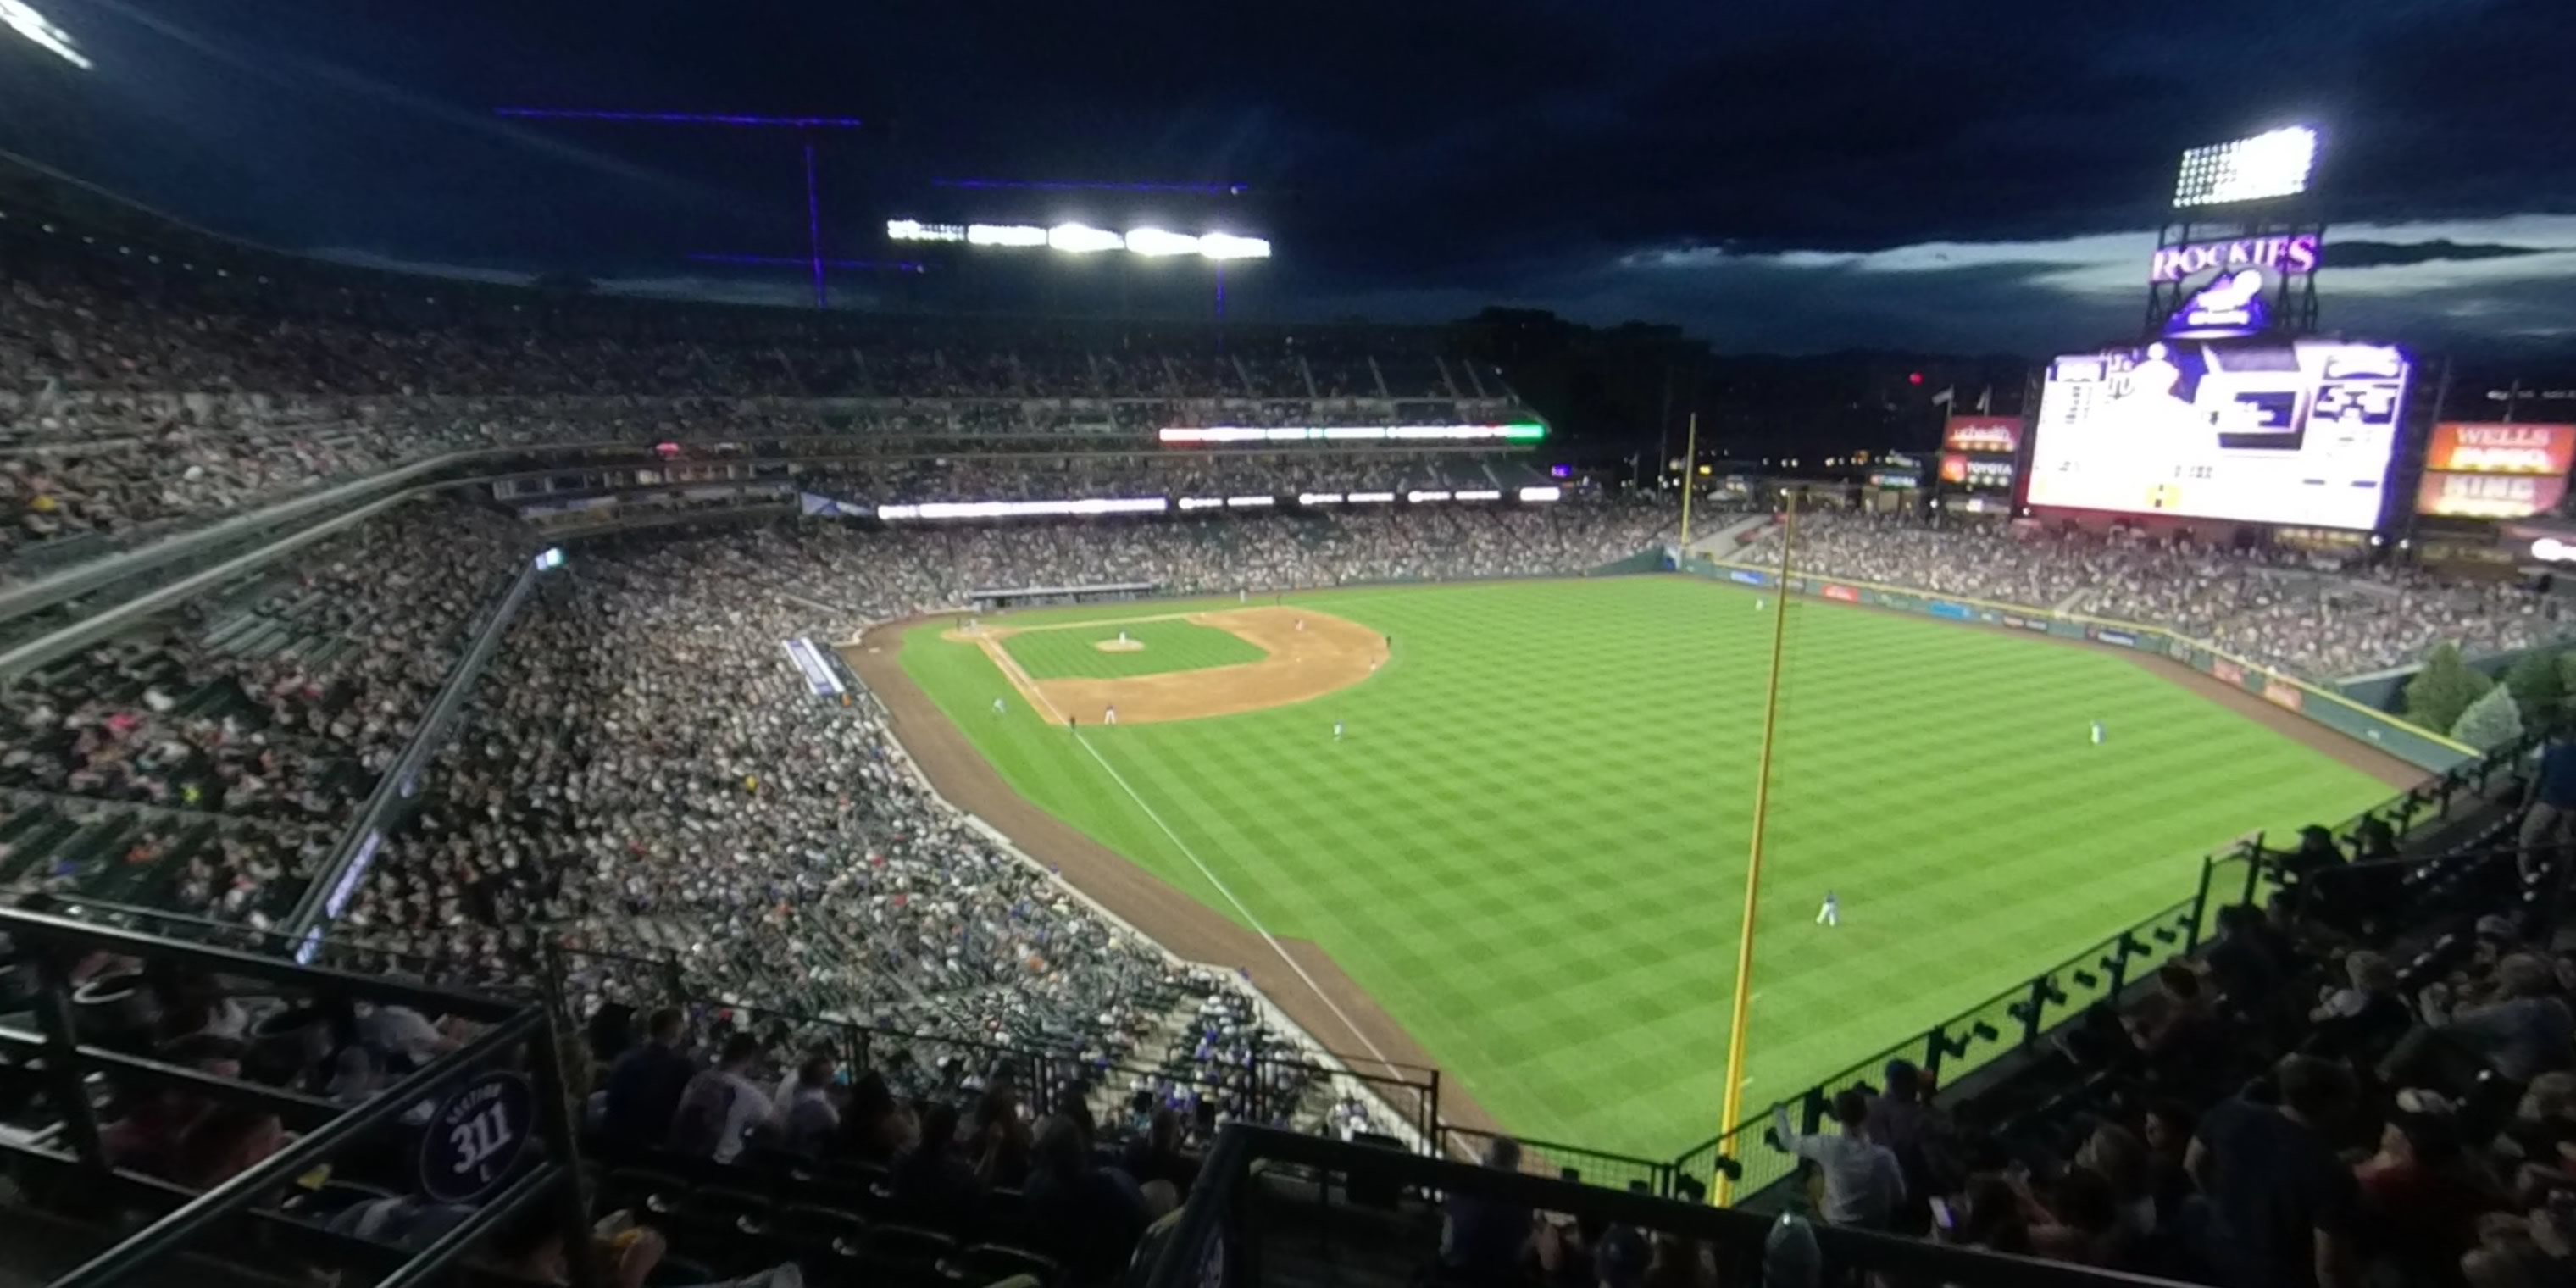 section 309 panoramic seat view  - coors field